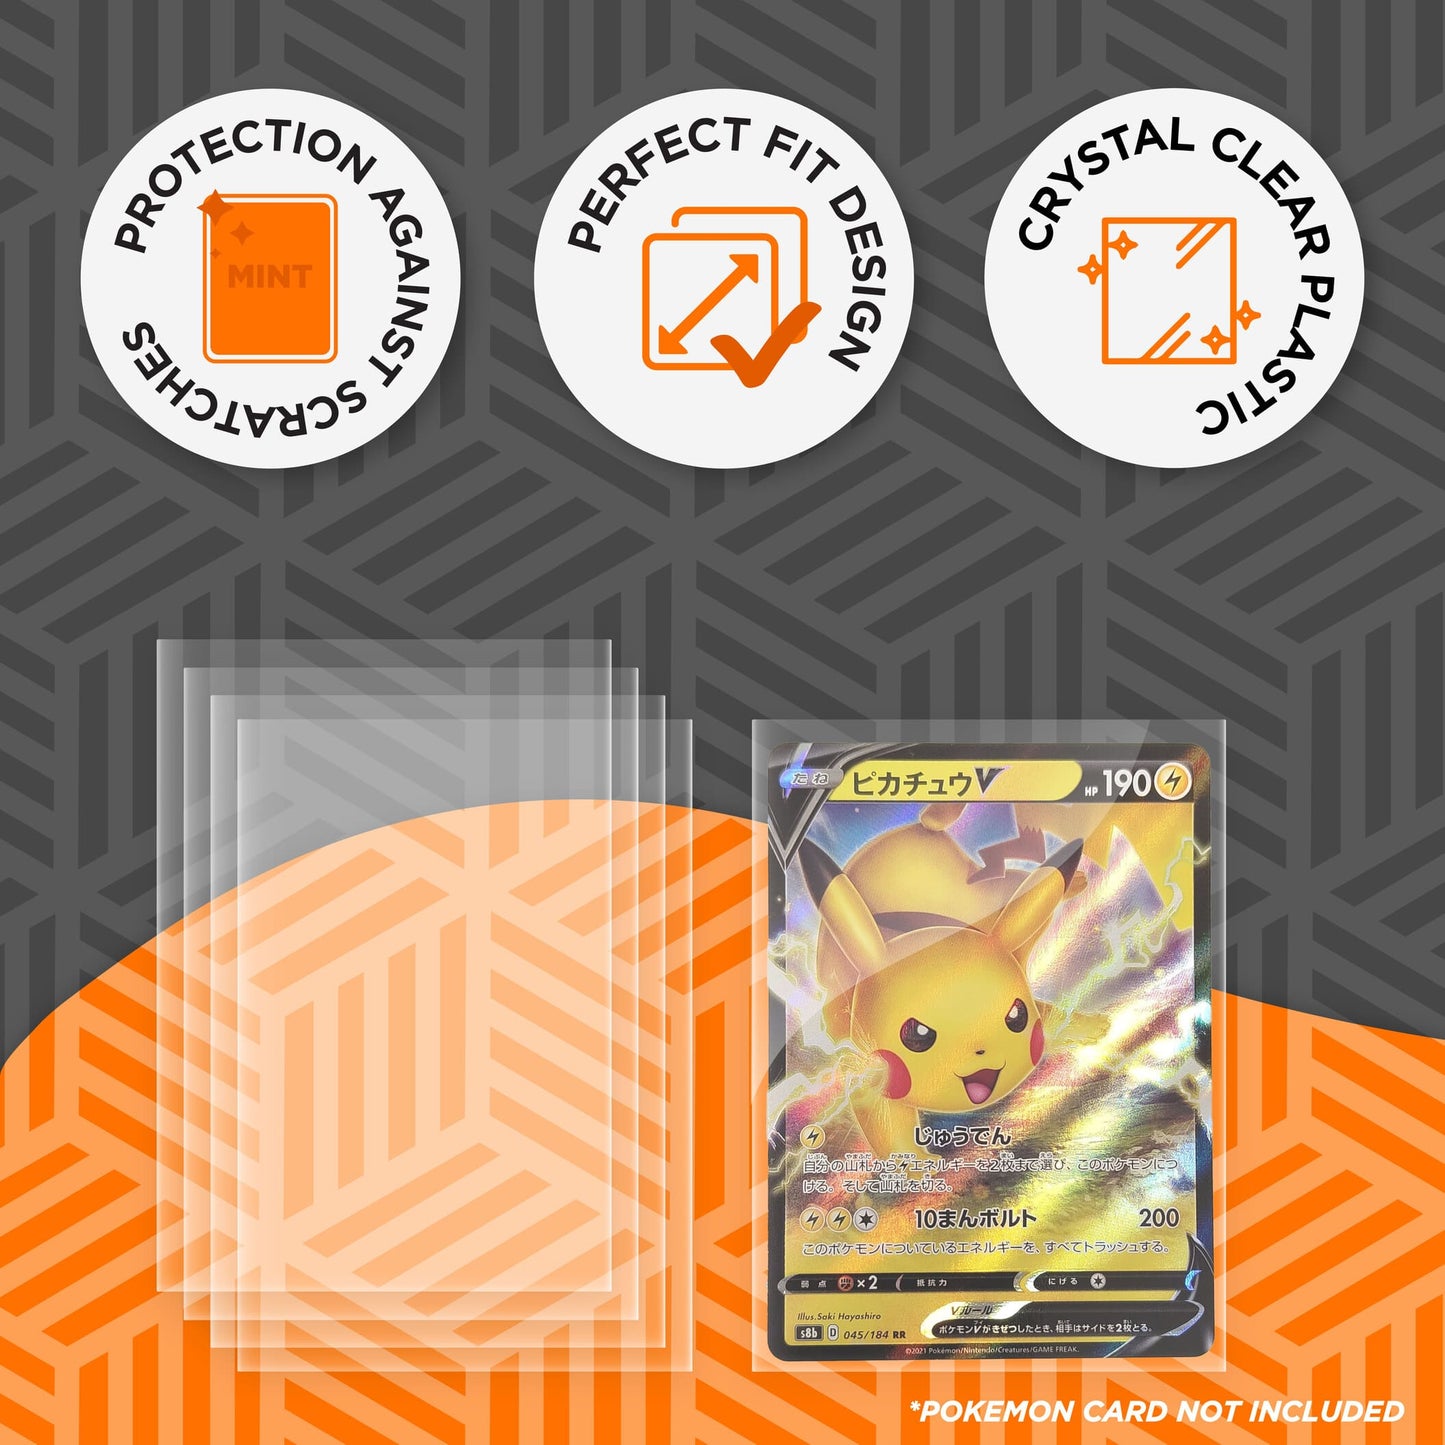 Universal Card Sleeves - 68x94mm for Pokémon , Magic The Gathering and Yugi-Oh cards - The Ultimate Protection for Your Best Collectibles - Friki Monkey